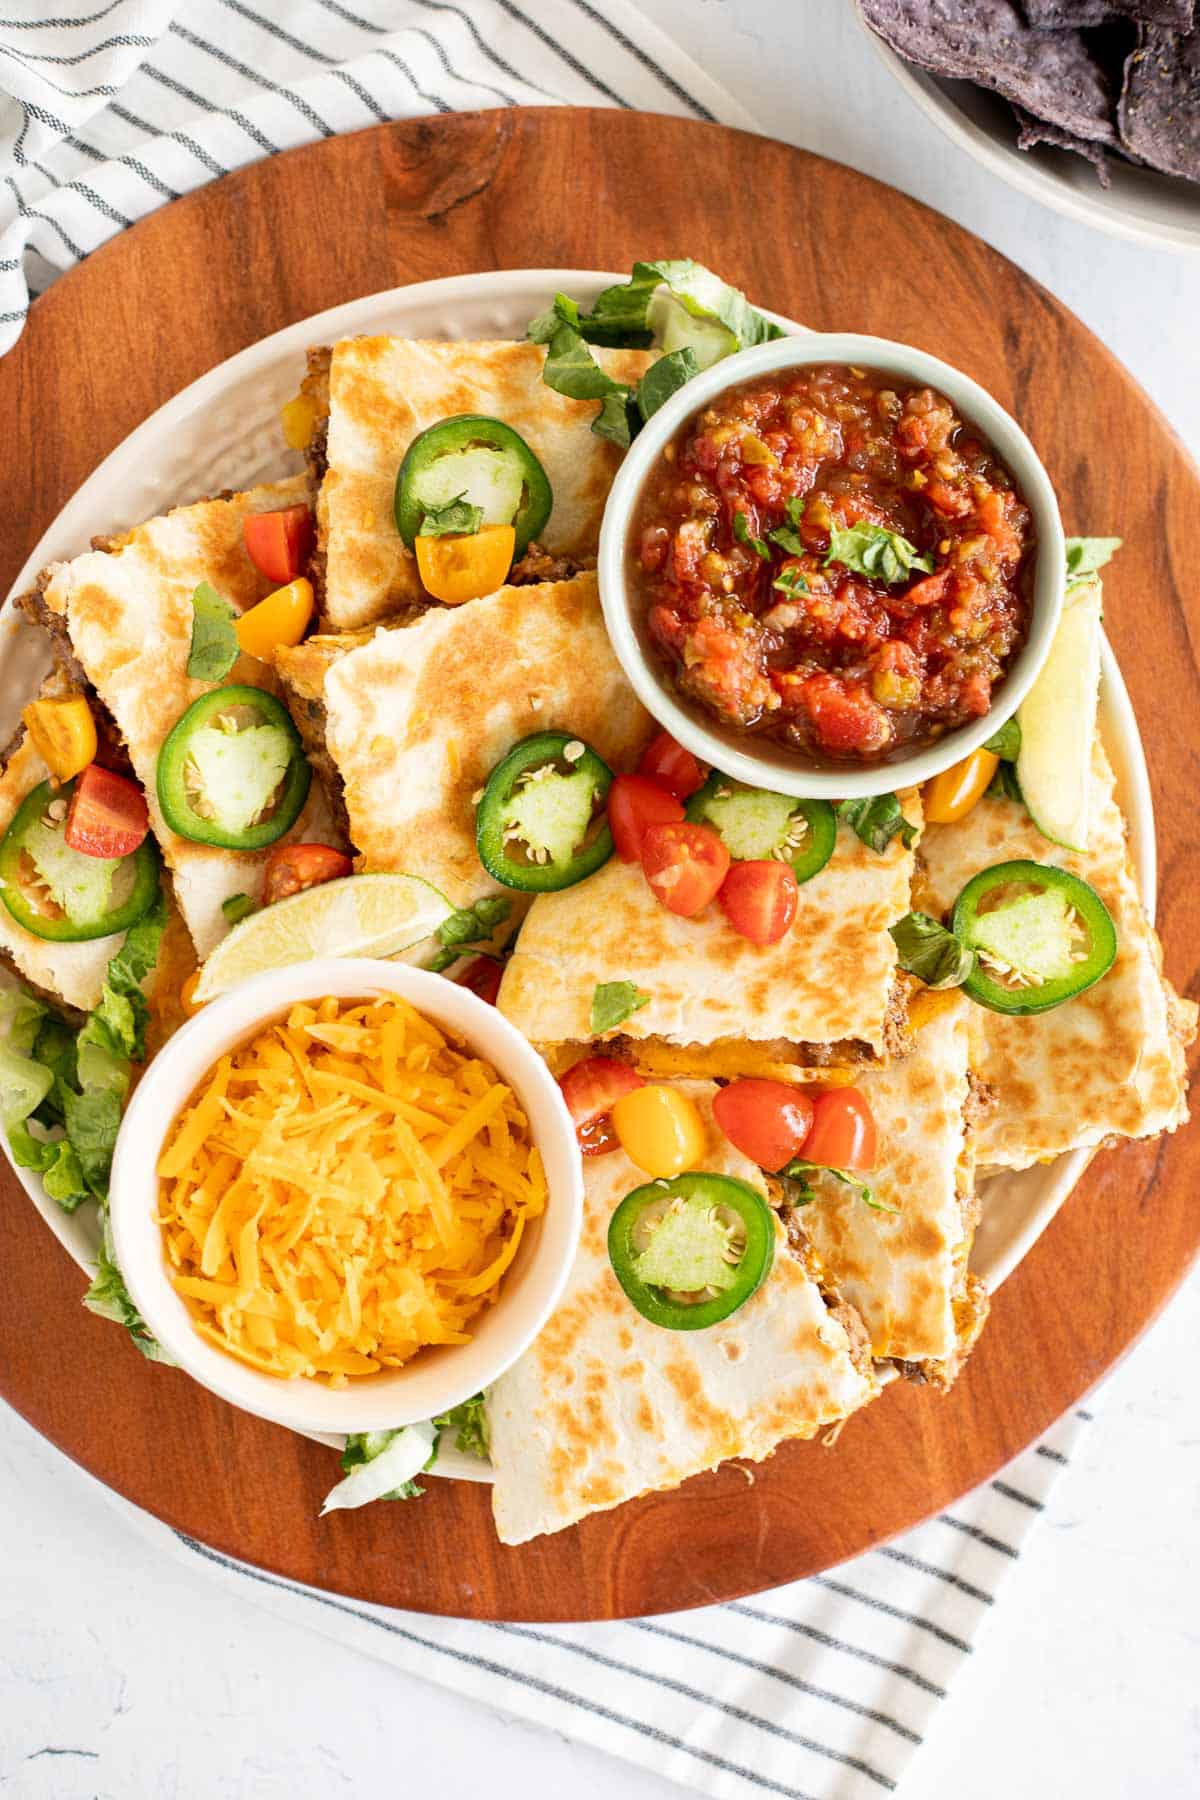 A platter of taco quesadillas with jalapenos, tomatoes, lime wedges, and bowls of salsa and cheese.